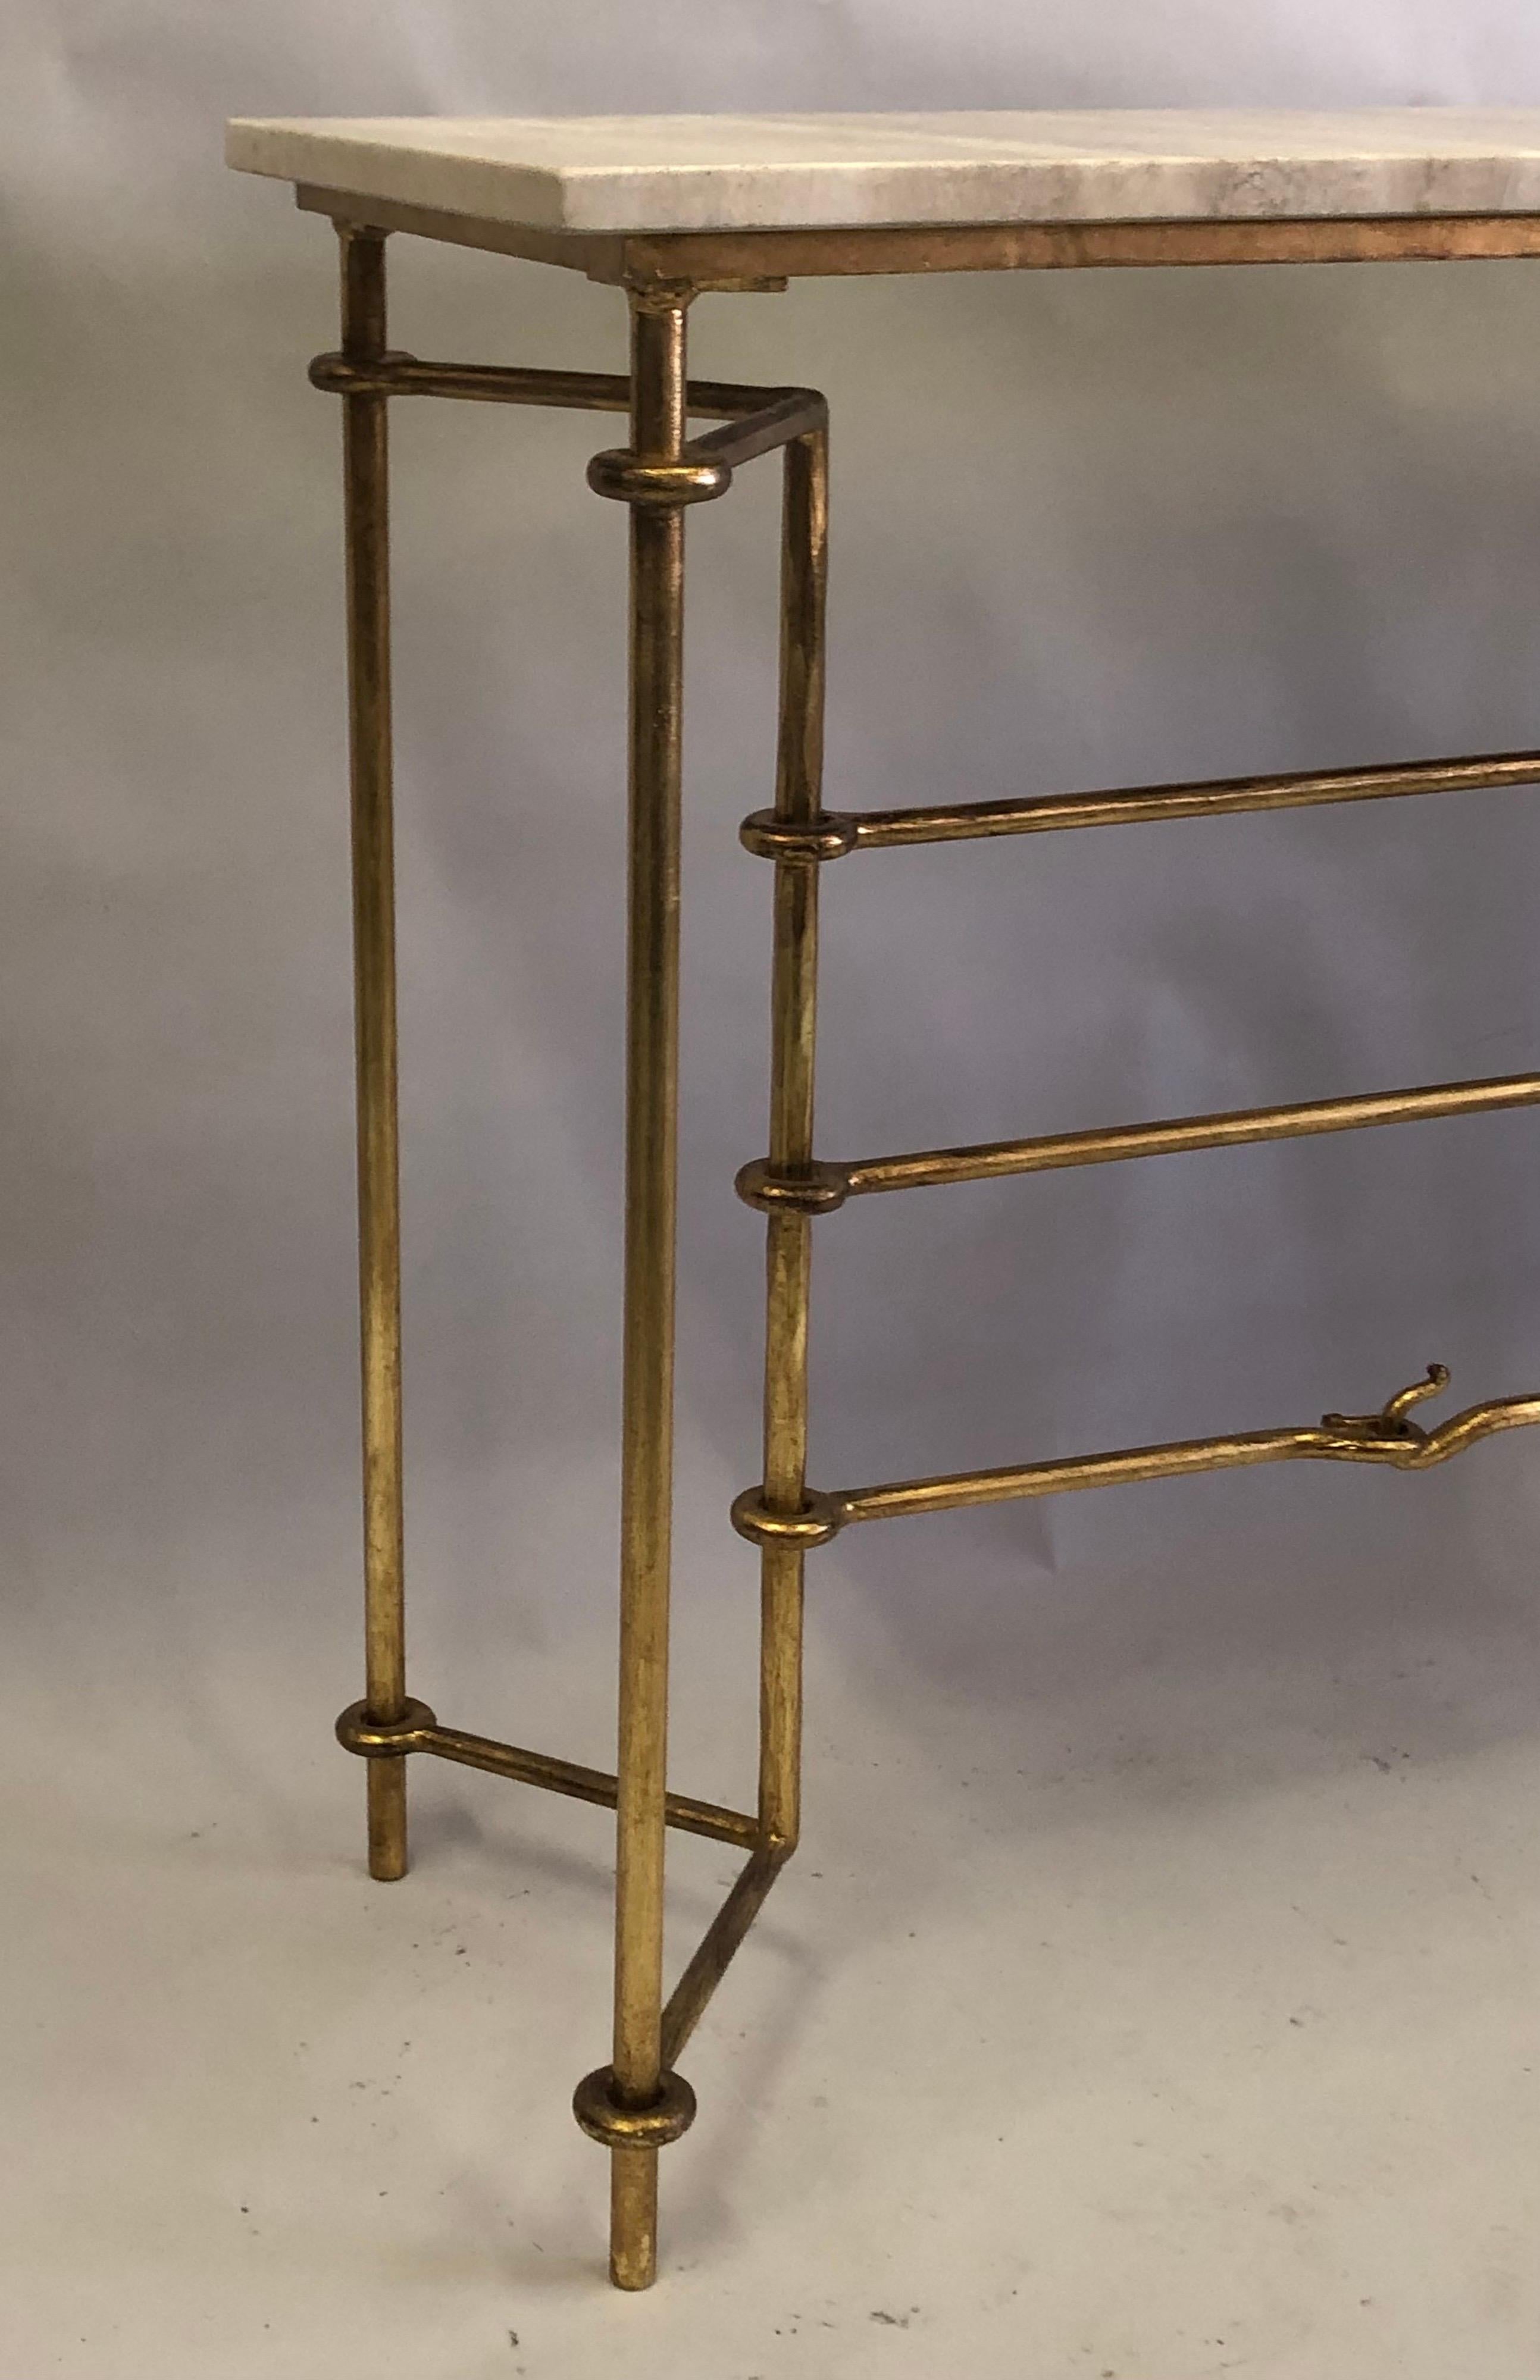 Italian Mid-Century Modern Neoclassical Gilt Iron Console by Banci for Hermès For Sale 5